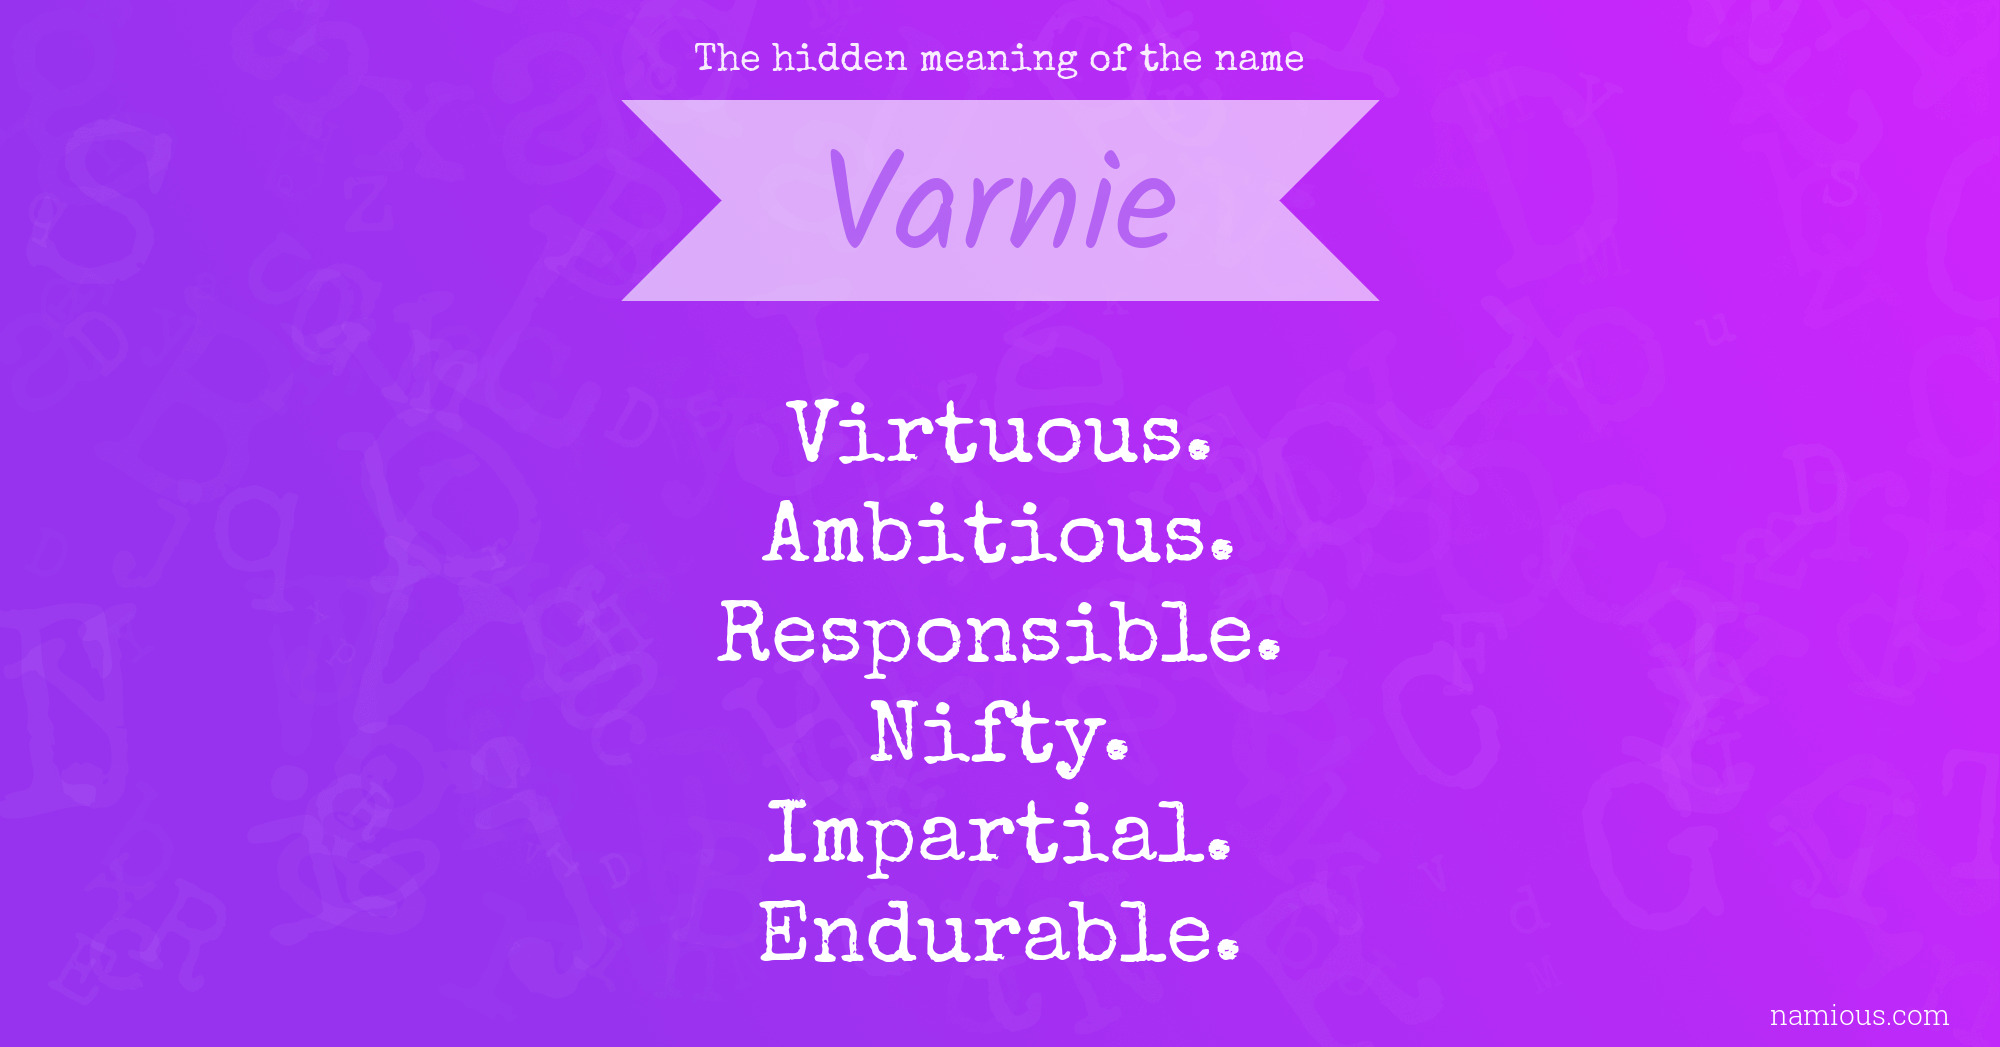 The hidden meaning of the name Varnie